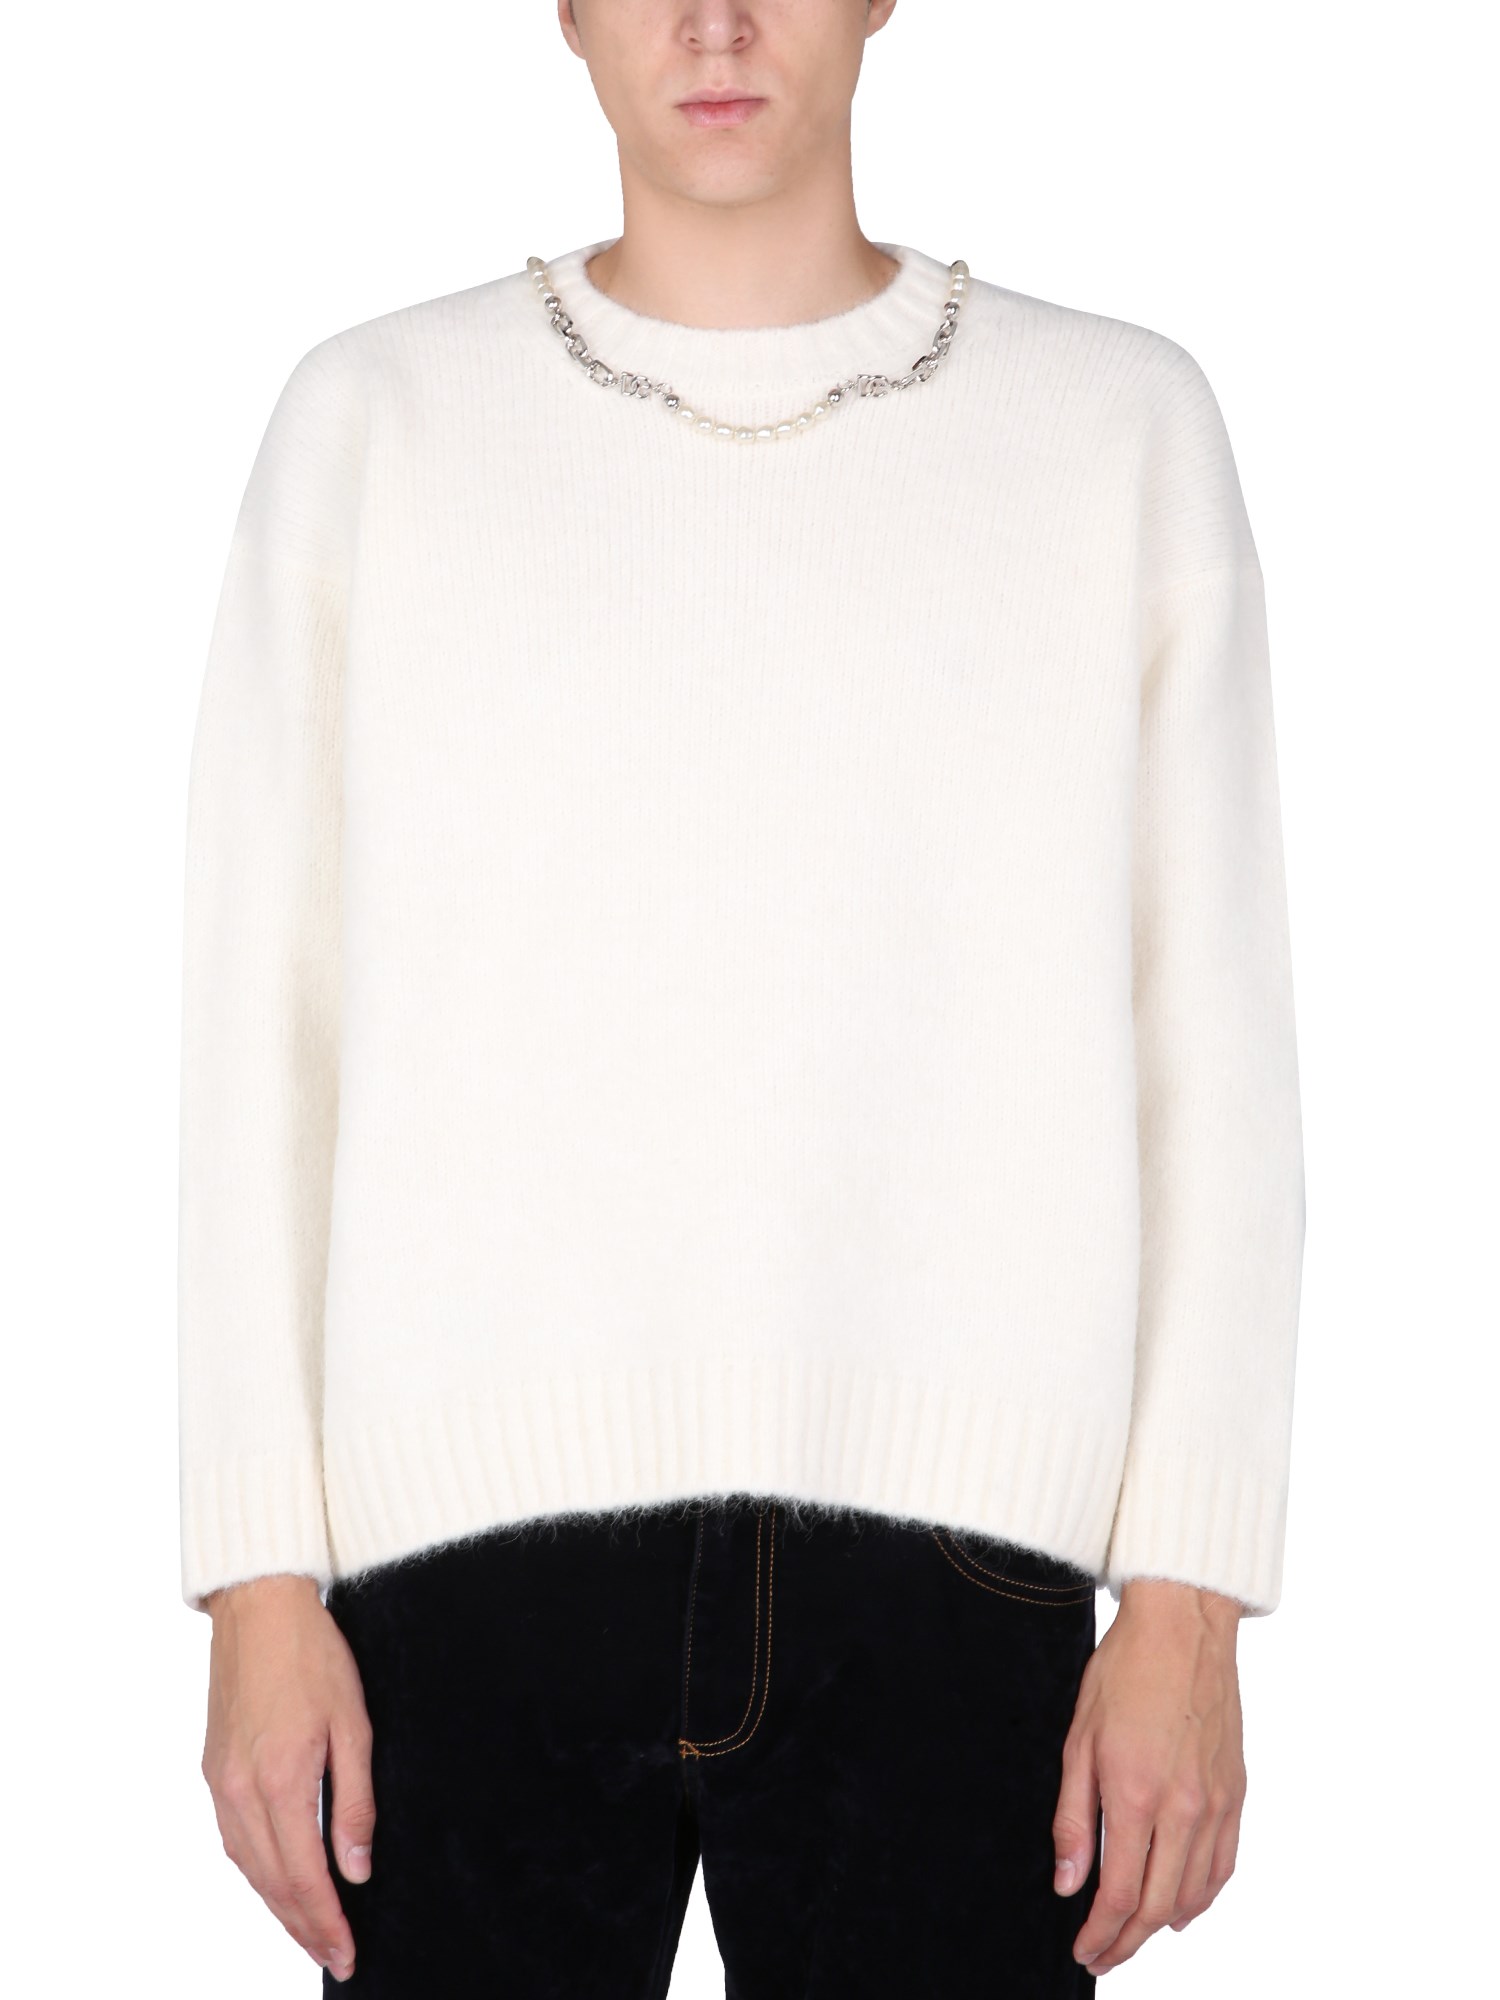 dolce & gabbana sweater with chain and pearls application